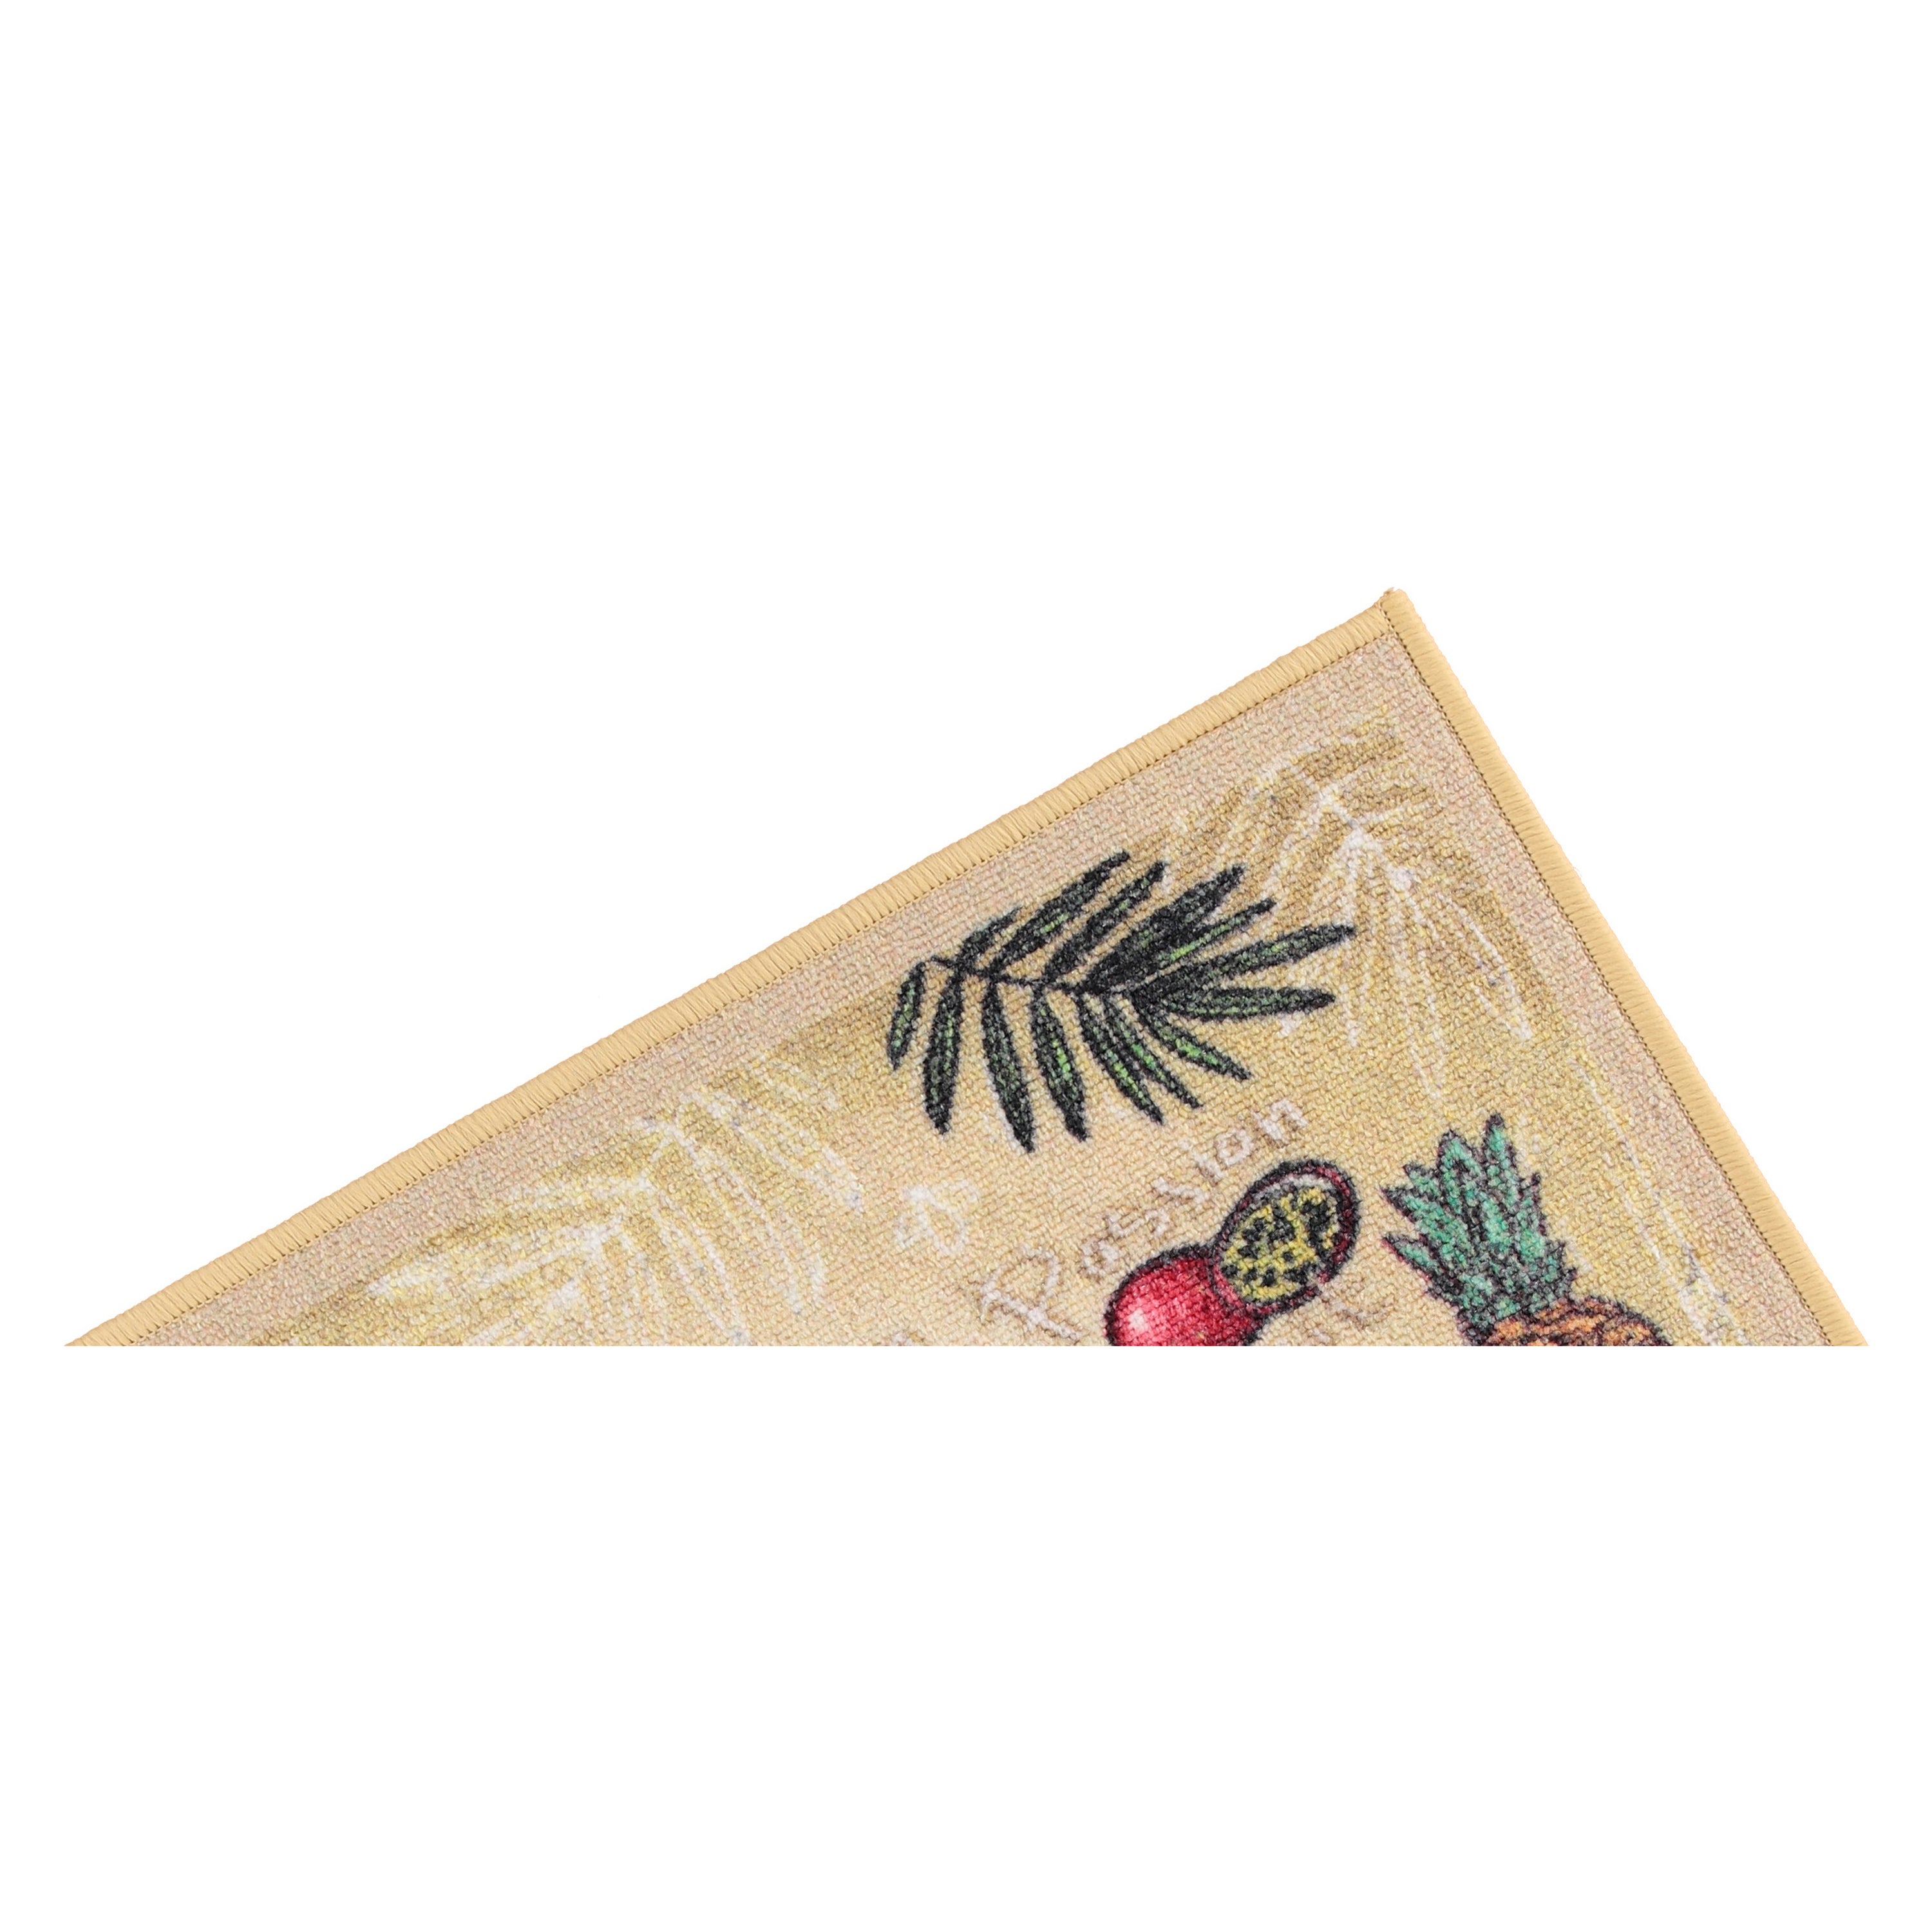 Tropical Fruits Non-Slip 19 in. x 39 in. - 18 in. x 30 in. 2-Piece Kitchen Mat Rug Set